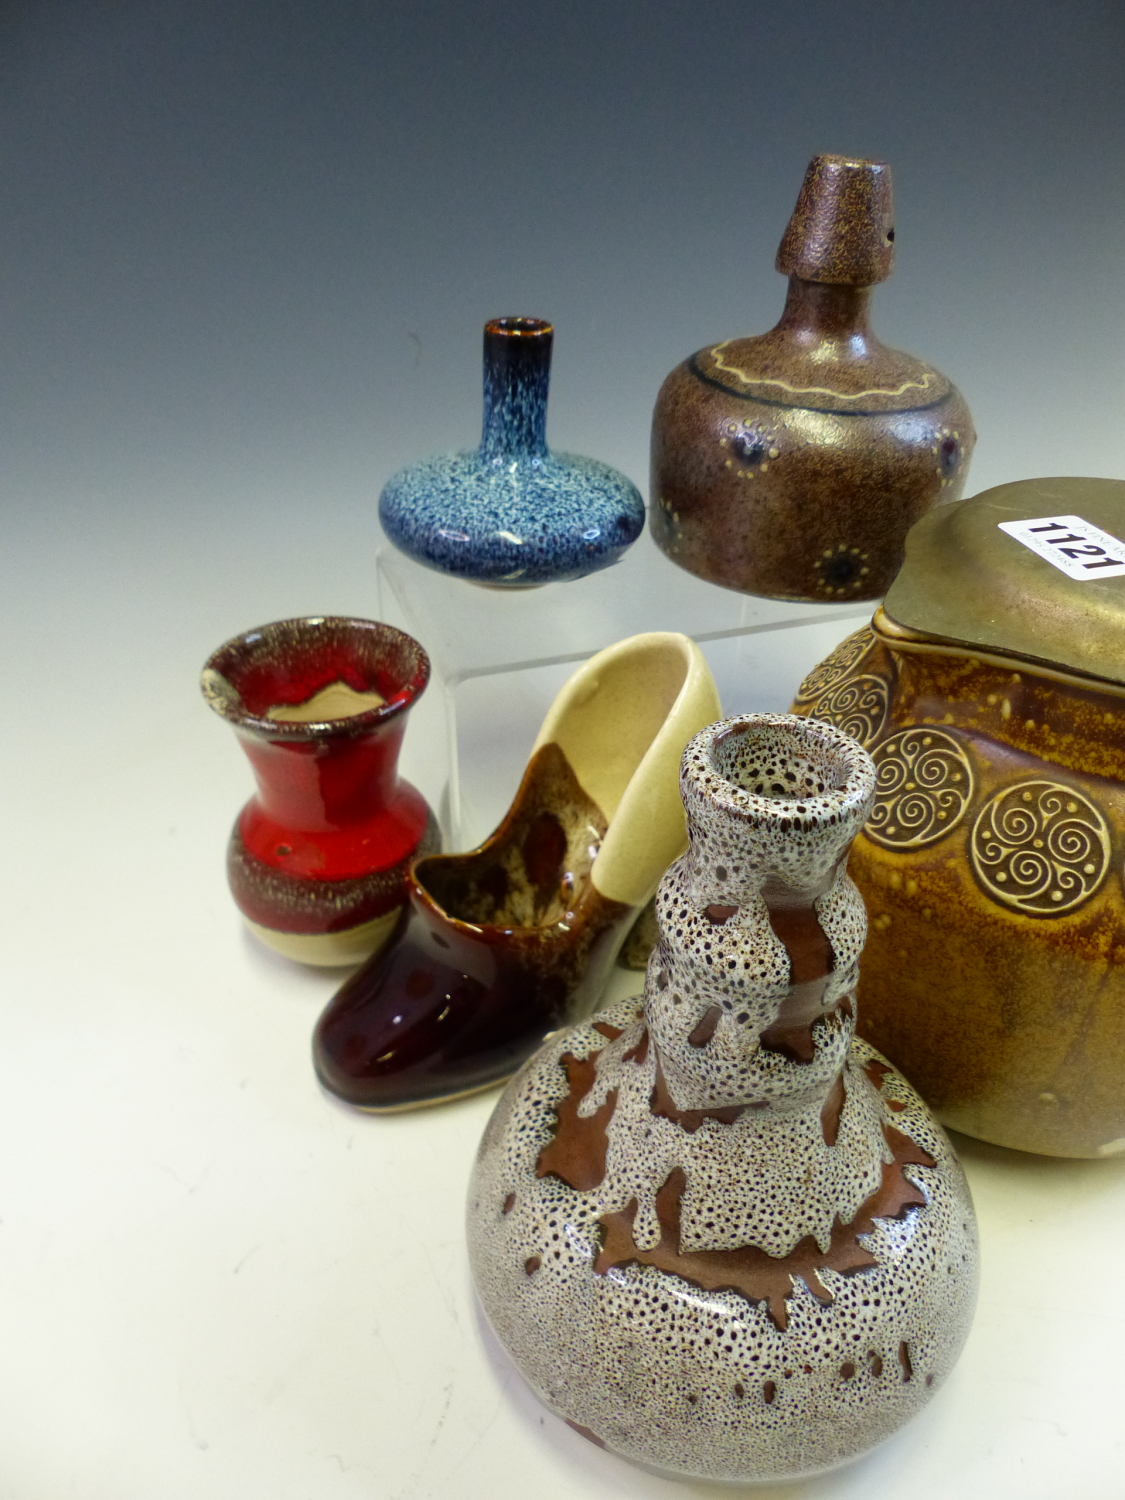 FOUR STUDIO POTTERY VASES, A SHOE AND A MERKELBACH BROWN STONE WARE JUG MOUNTED WITH A METAL LID - Image 3 of 3